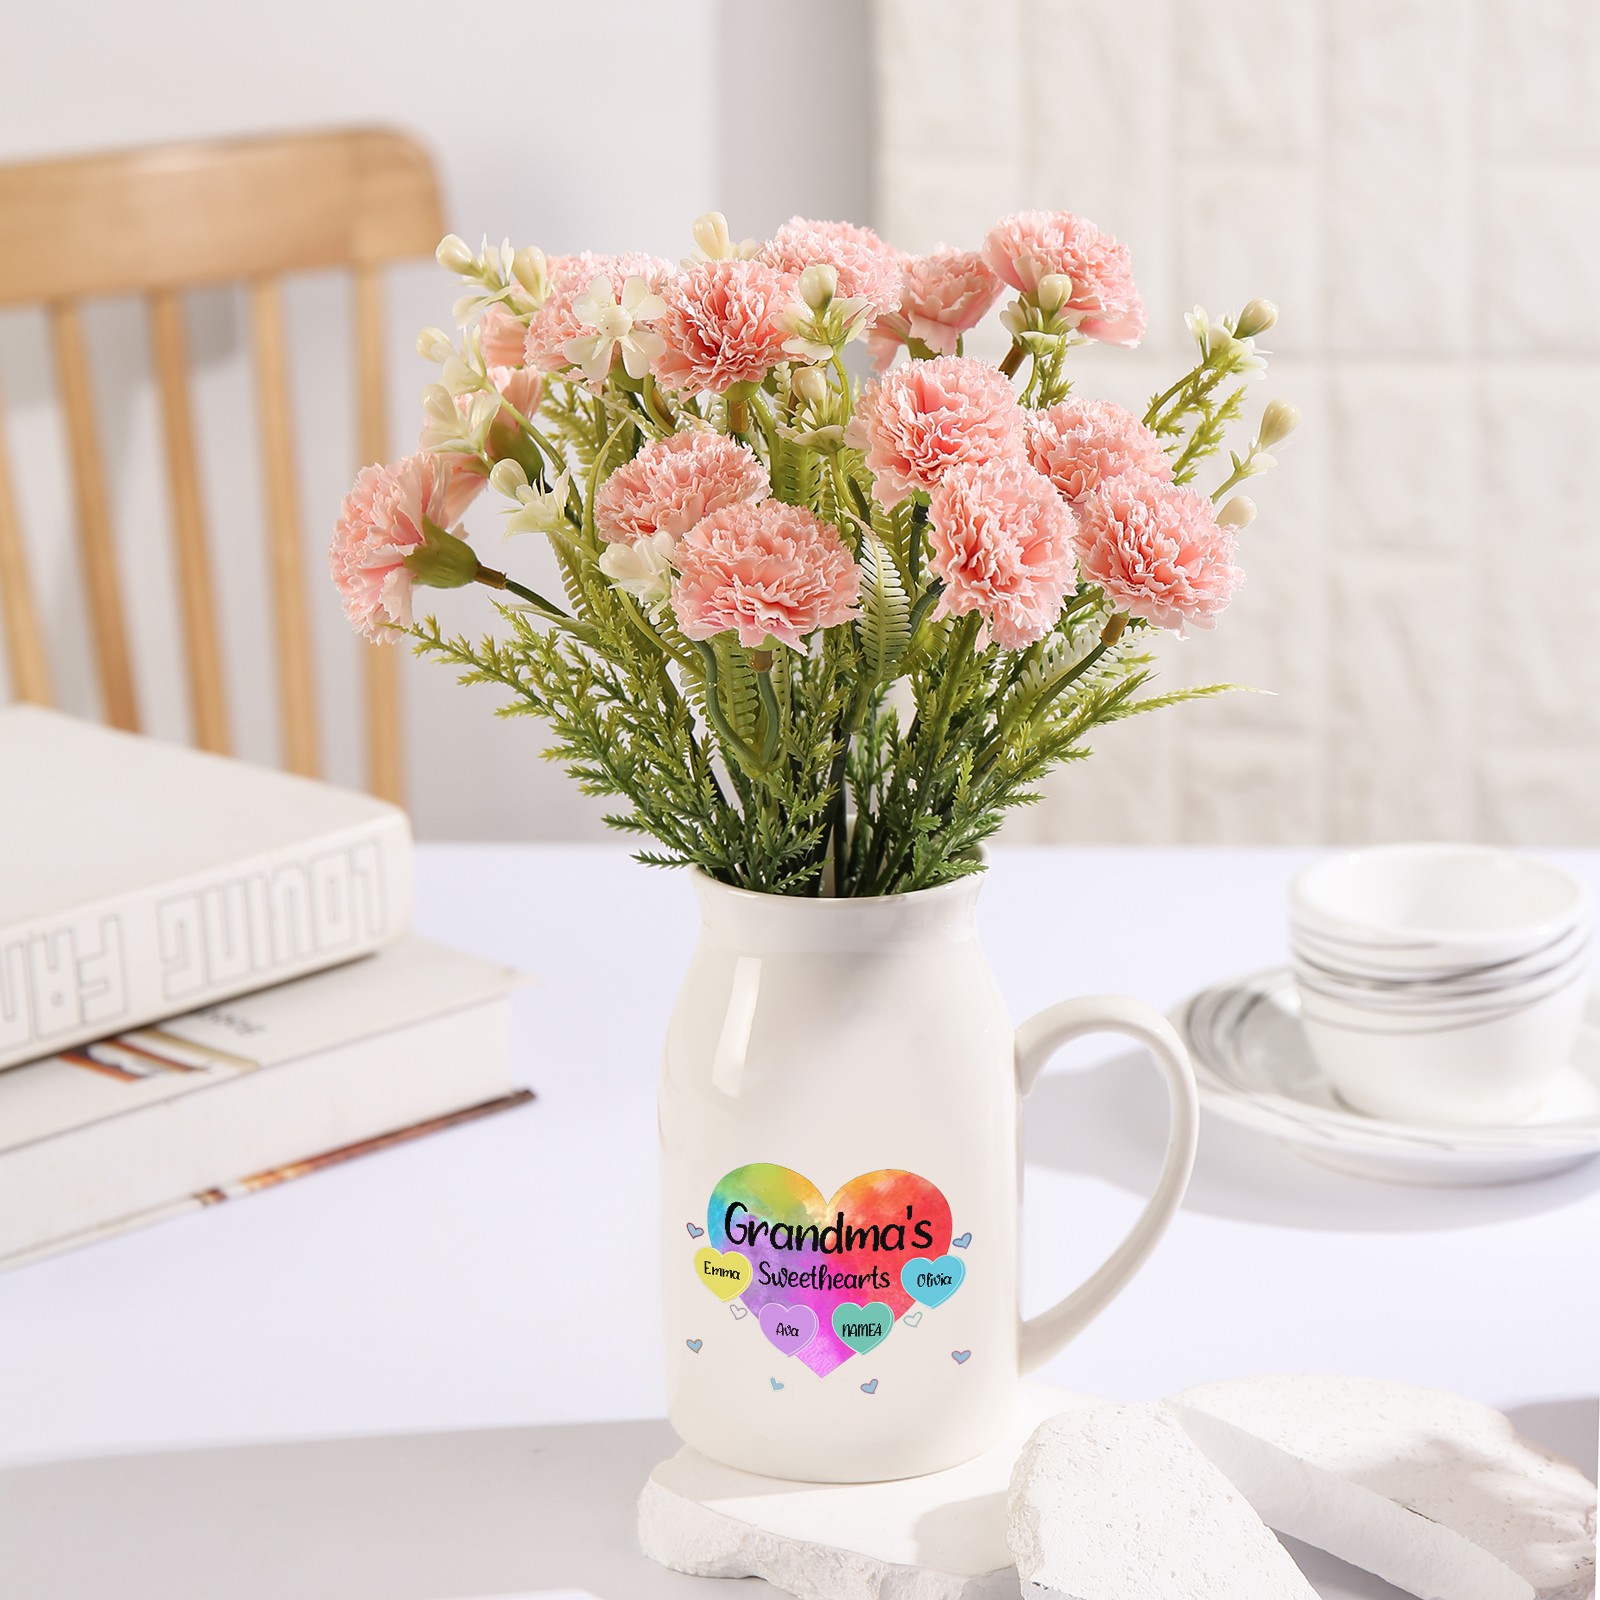 4 Names - Personalized Customizable Name Colorful Love Heart Style Ceramic Vase as a Gift for Grandma